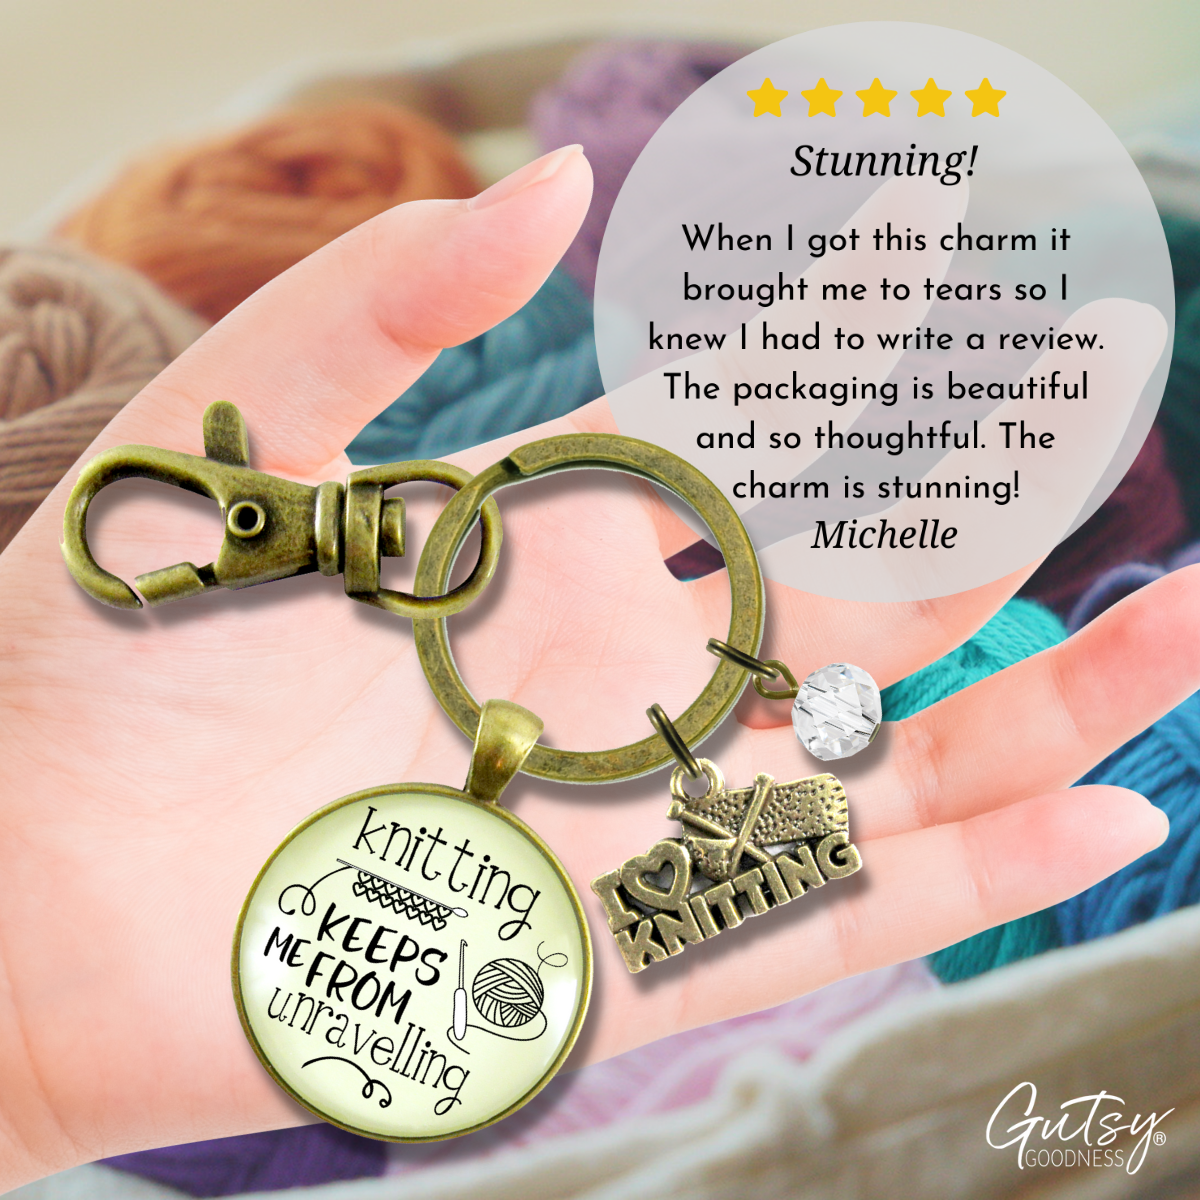 Knitter Keychain Knitting Keeps Me From Unravelling Women's Inspired Crafters Jewelry Gift Yarn - Gutsy Goodness